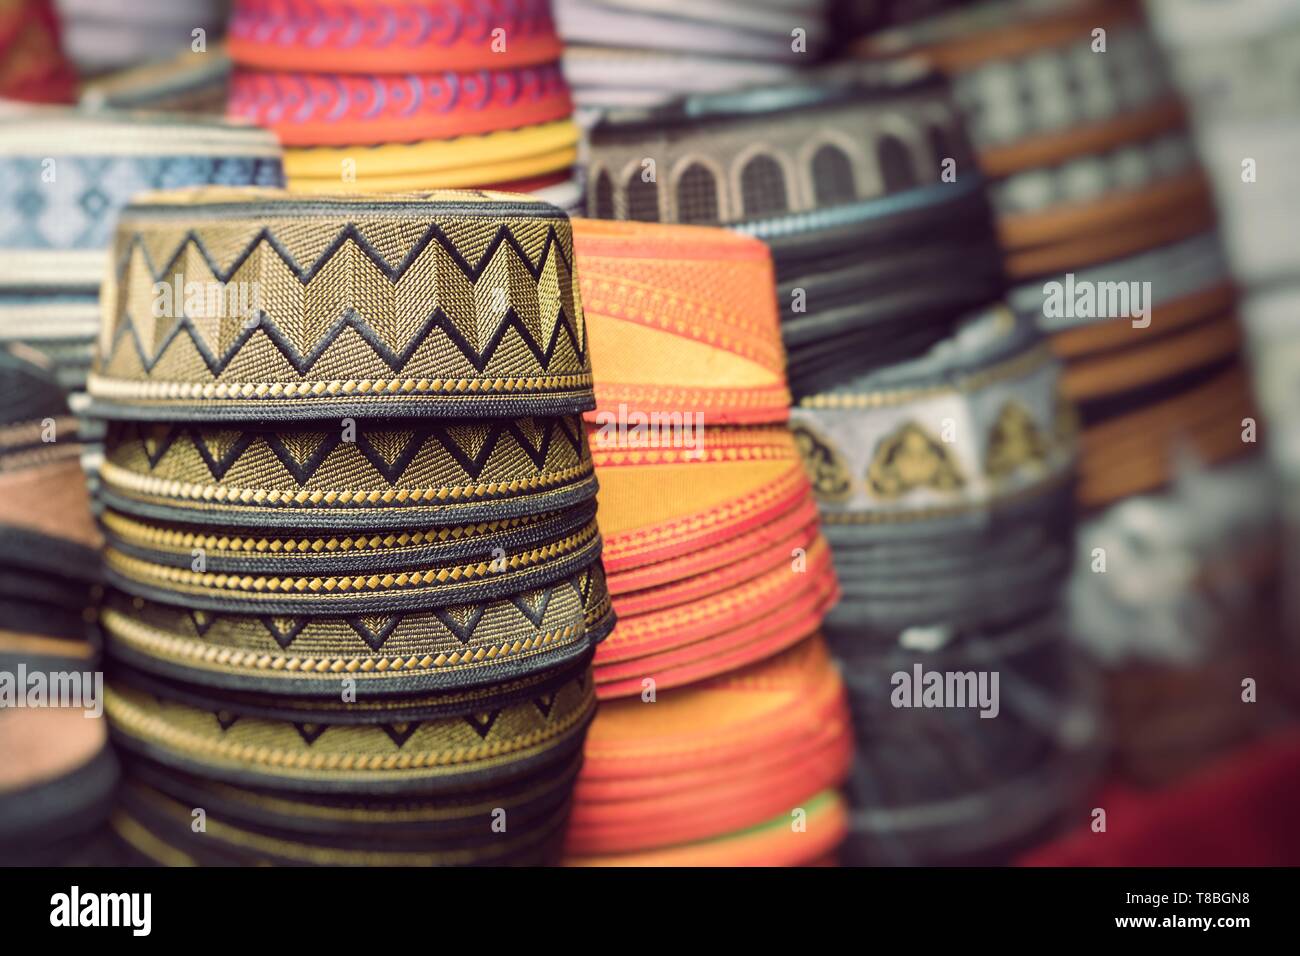 Colorful souvenirs for sale on the street in a shop in Morocco. Stock Photo